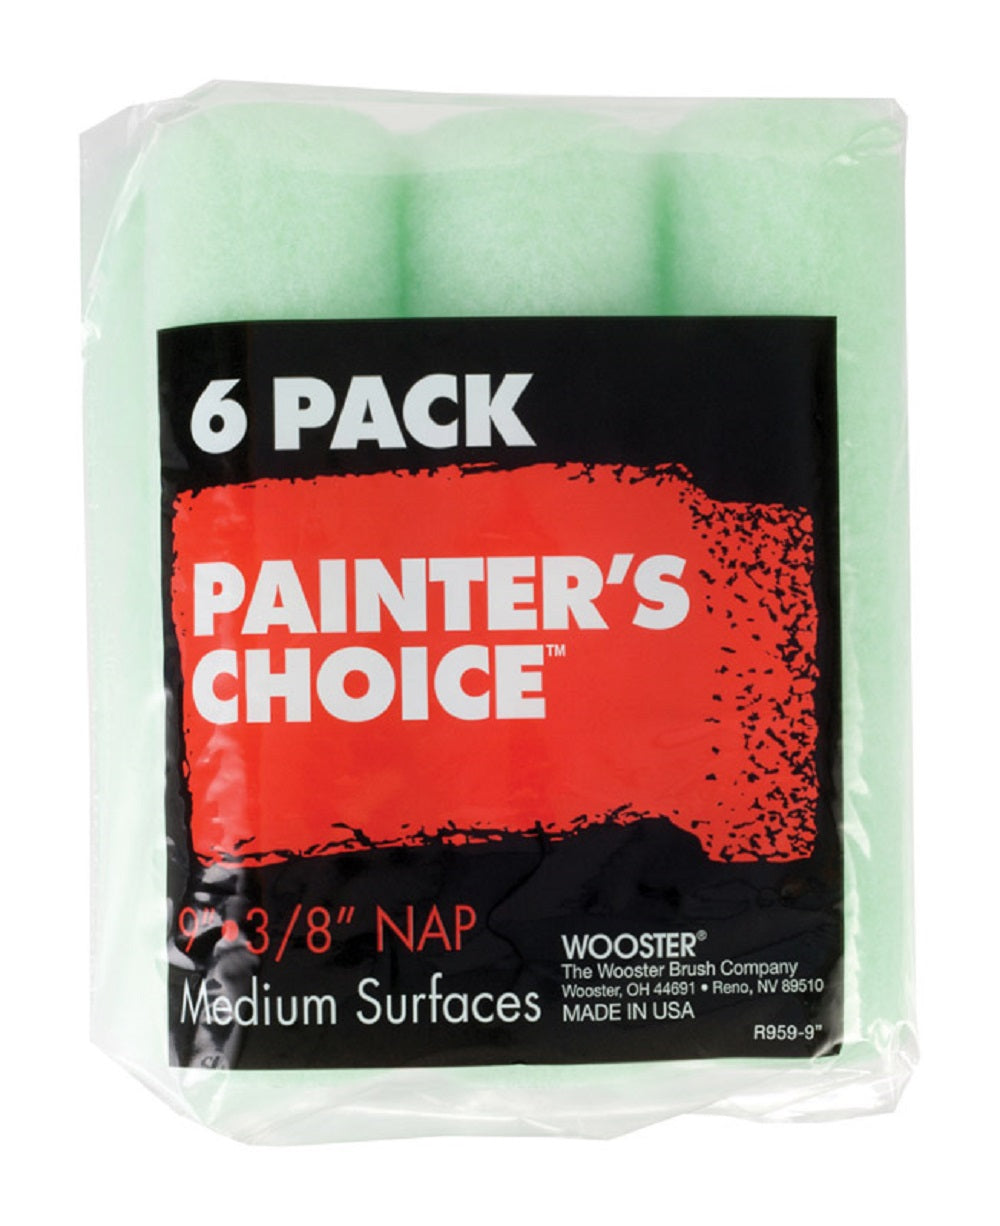 Wooster R959-9 Painter's Choice Paint Roller Cover, Mint Green, 6 Cover